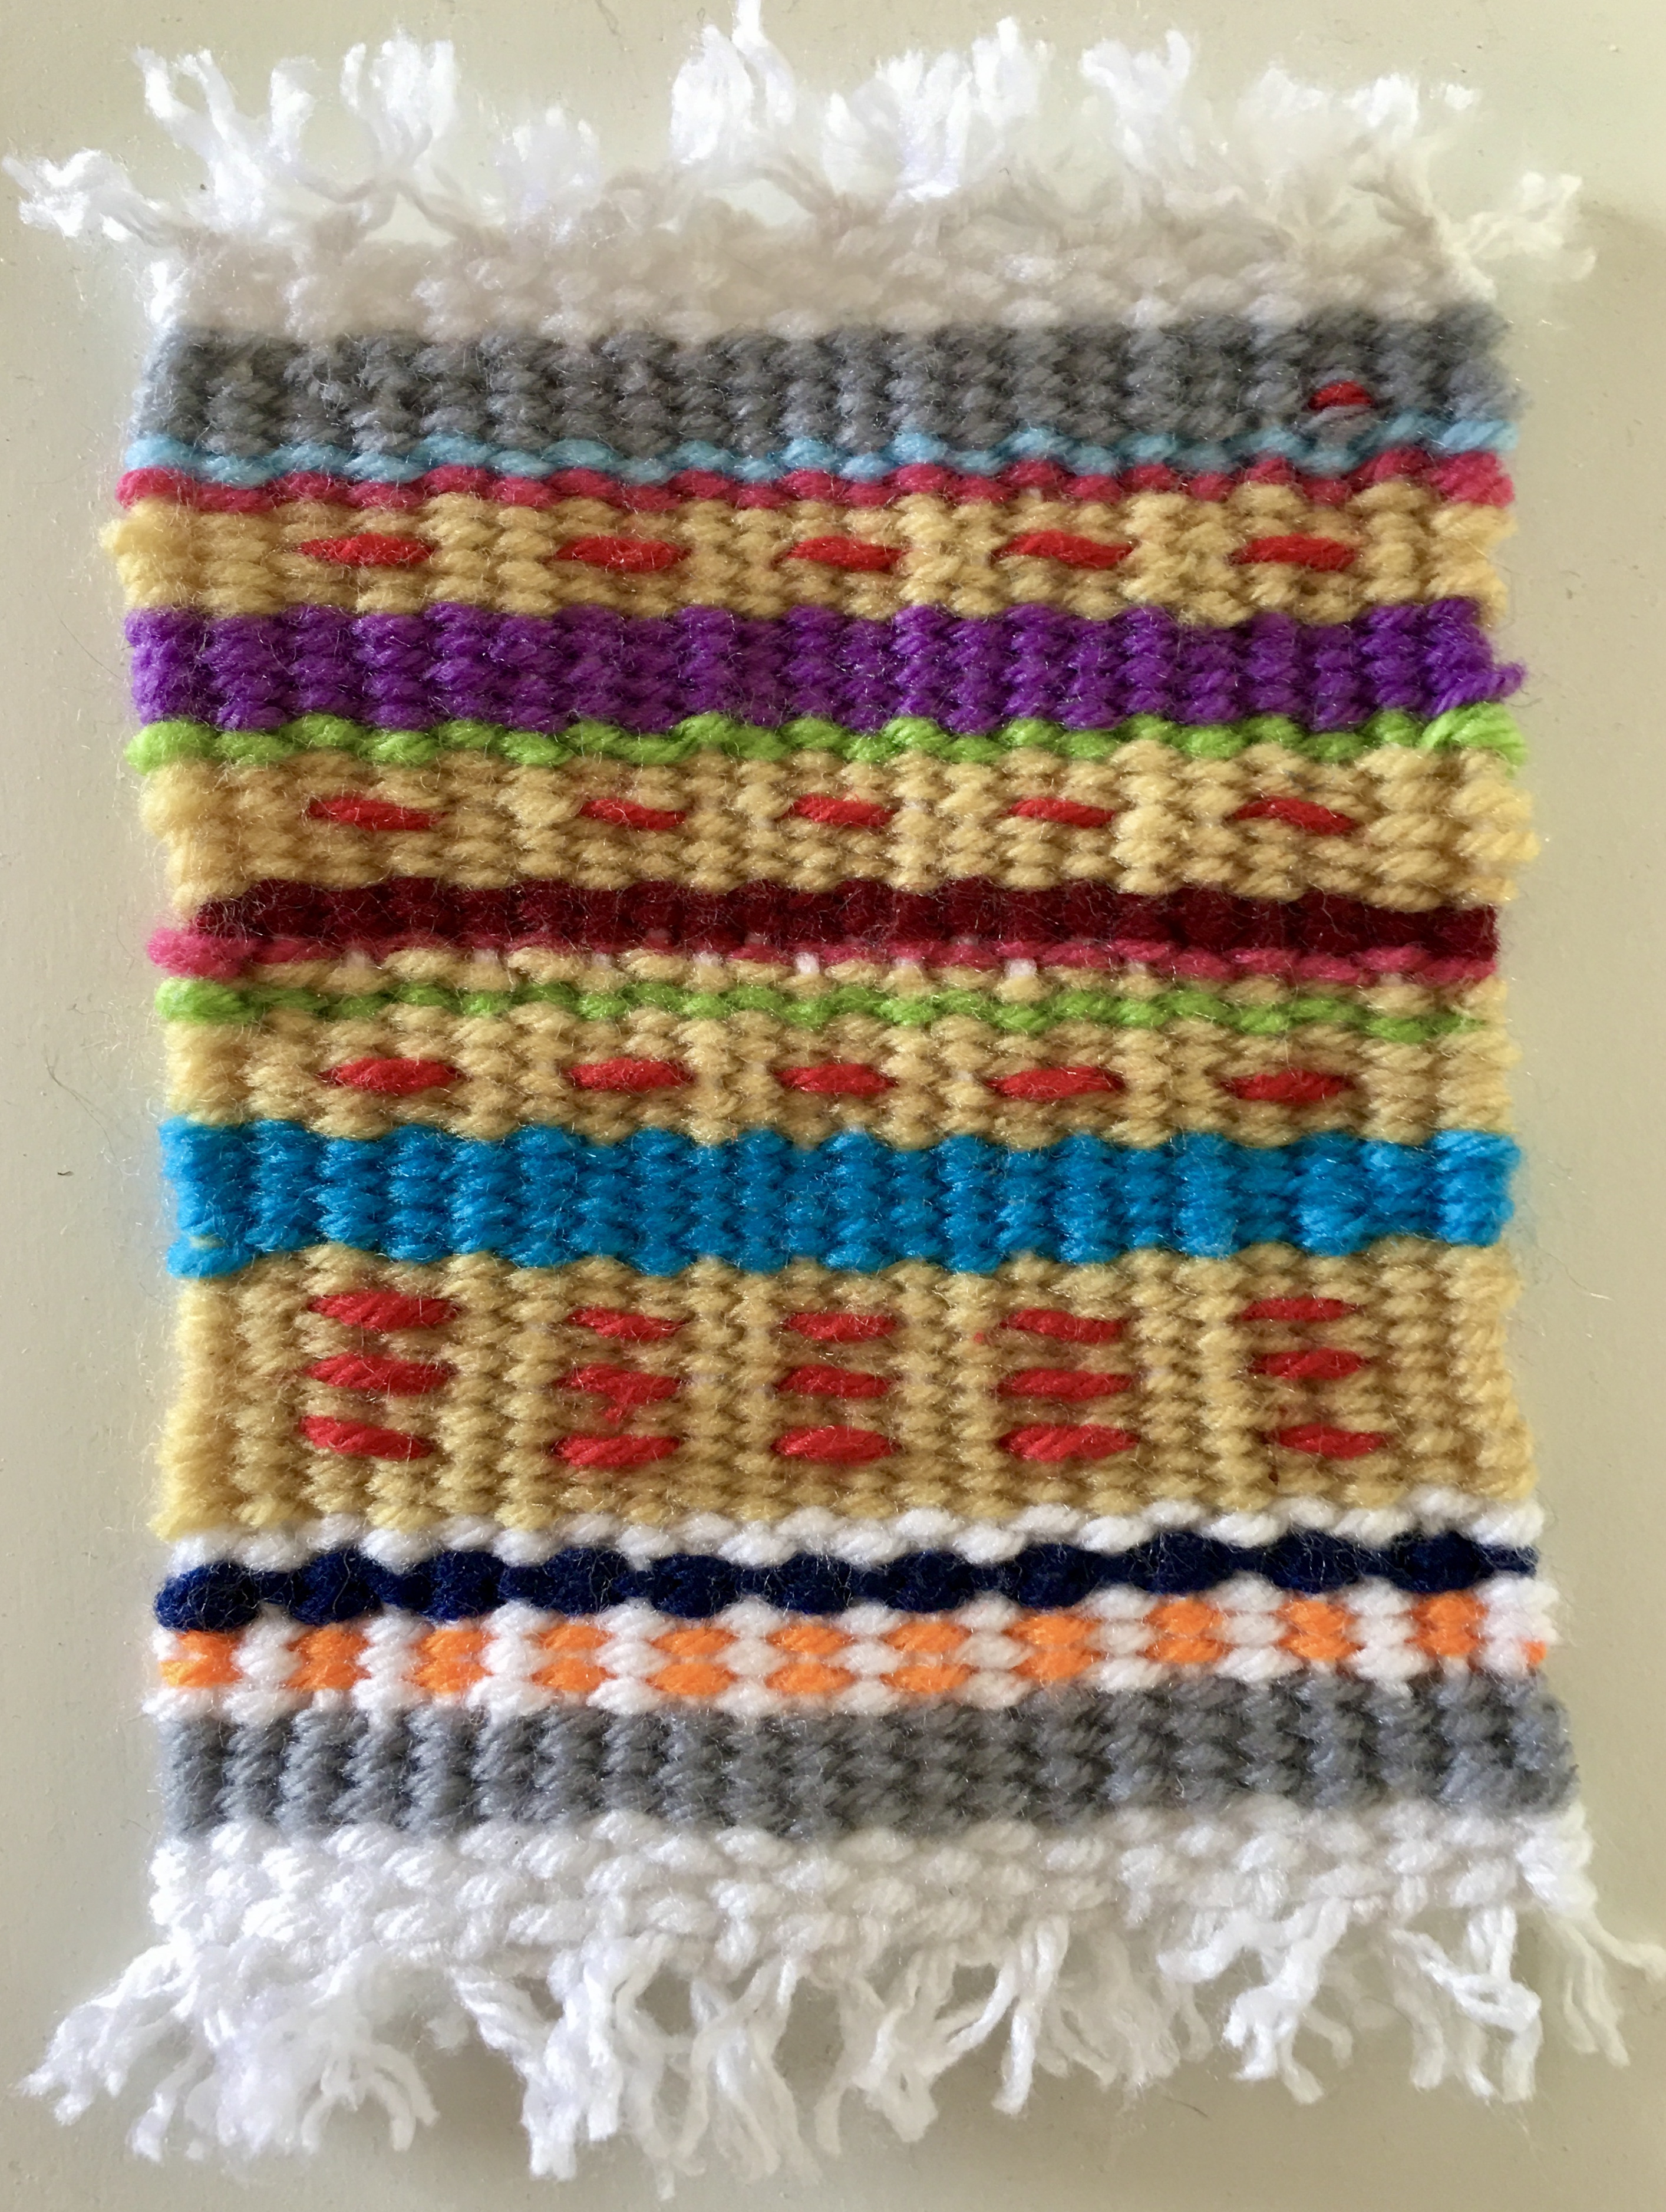 a small rectangular weaving with stripes of irregularly patterned colors